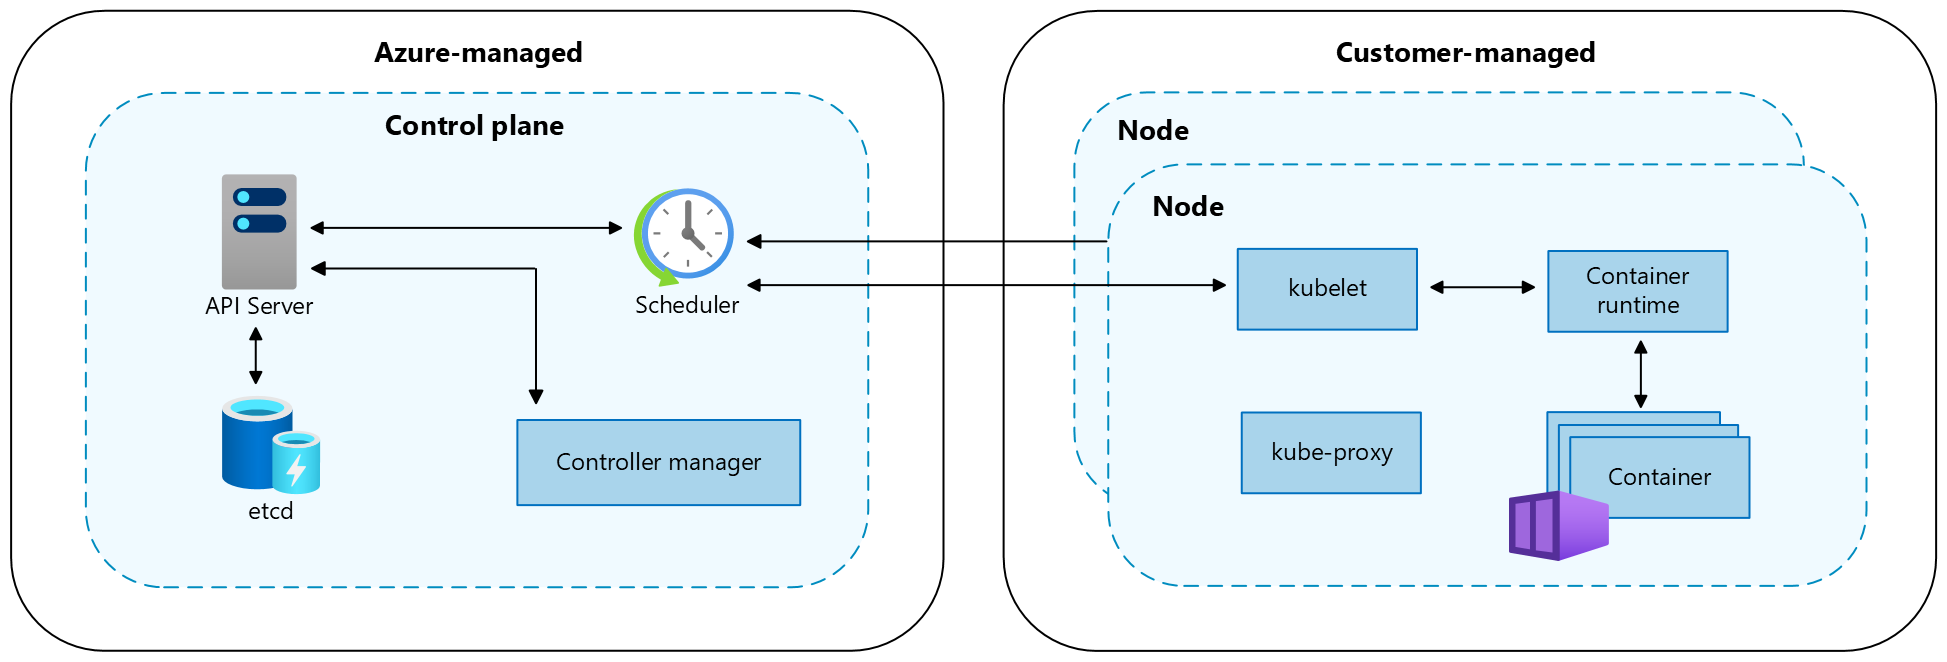 Diagram of Kubernetes control plane and node components.